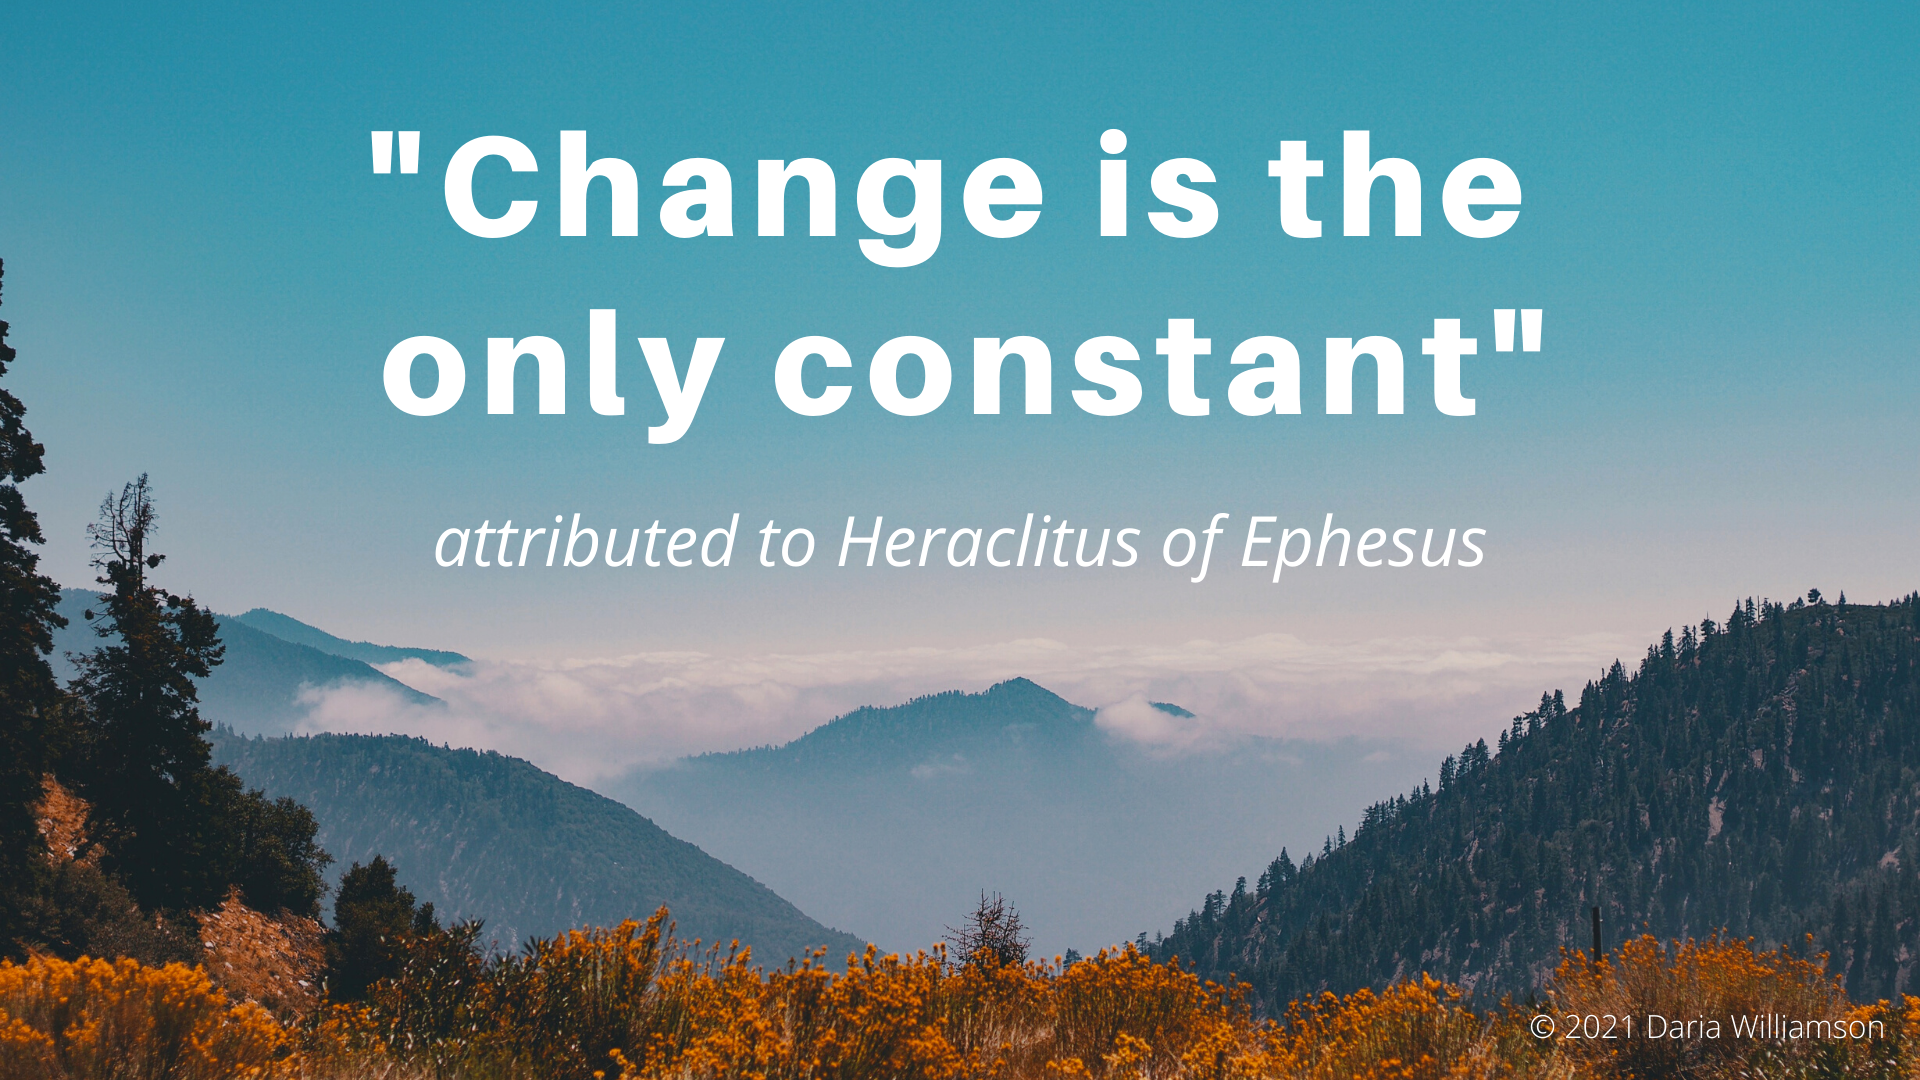 A photograph with the text "Change is the only constant" (attributed to Heraclitus) superimposed